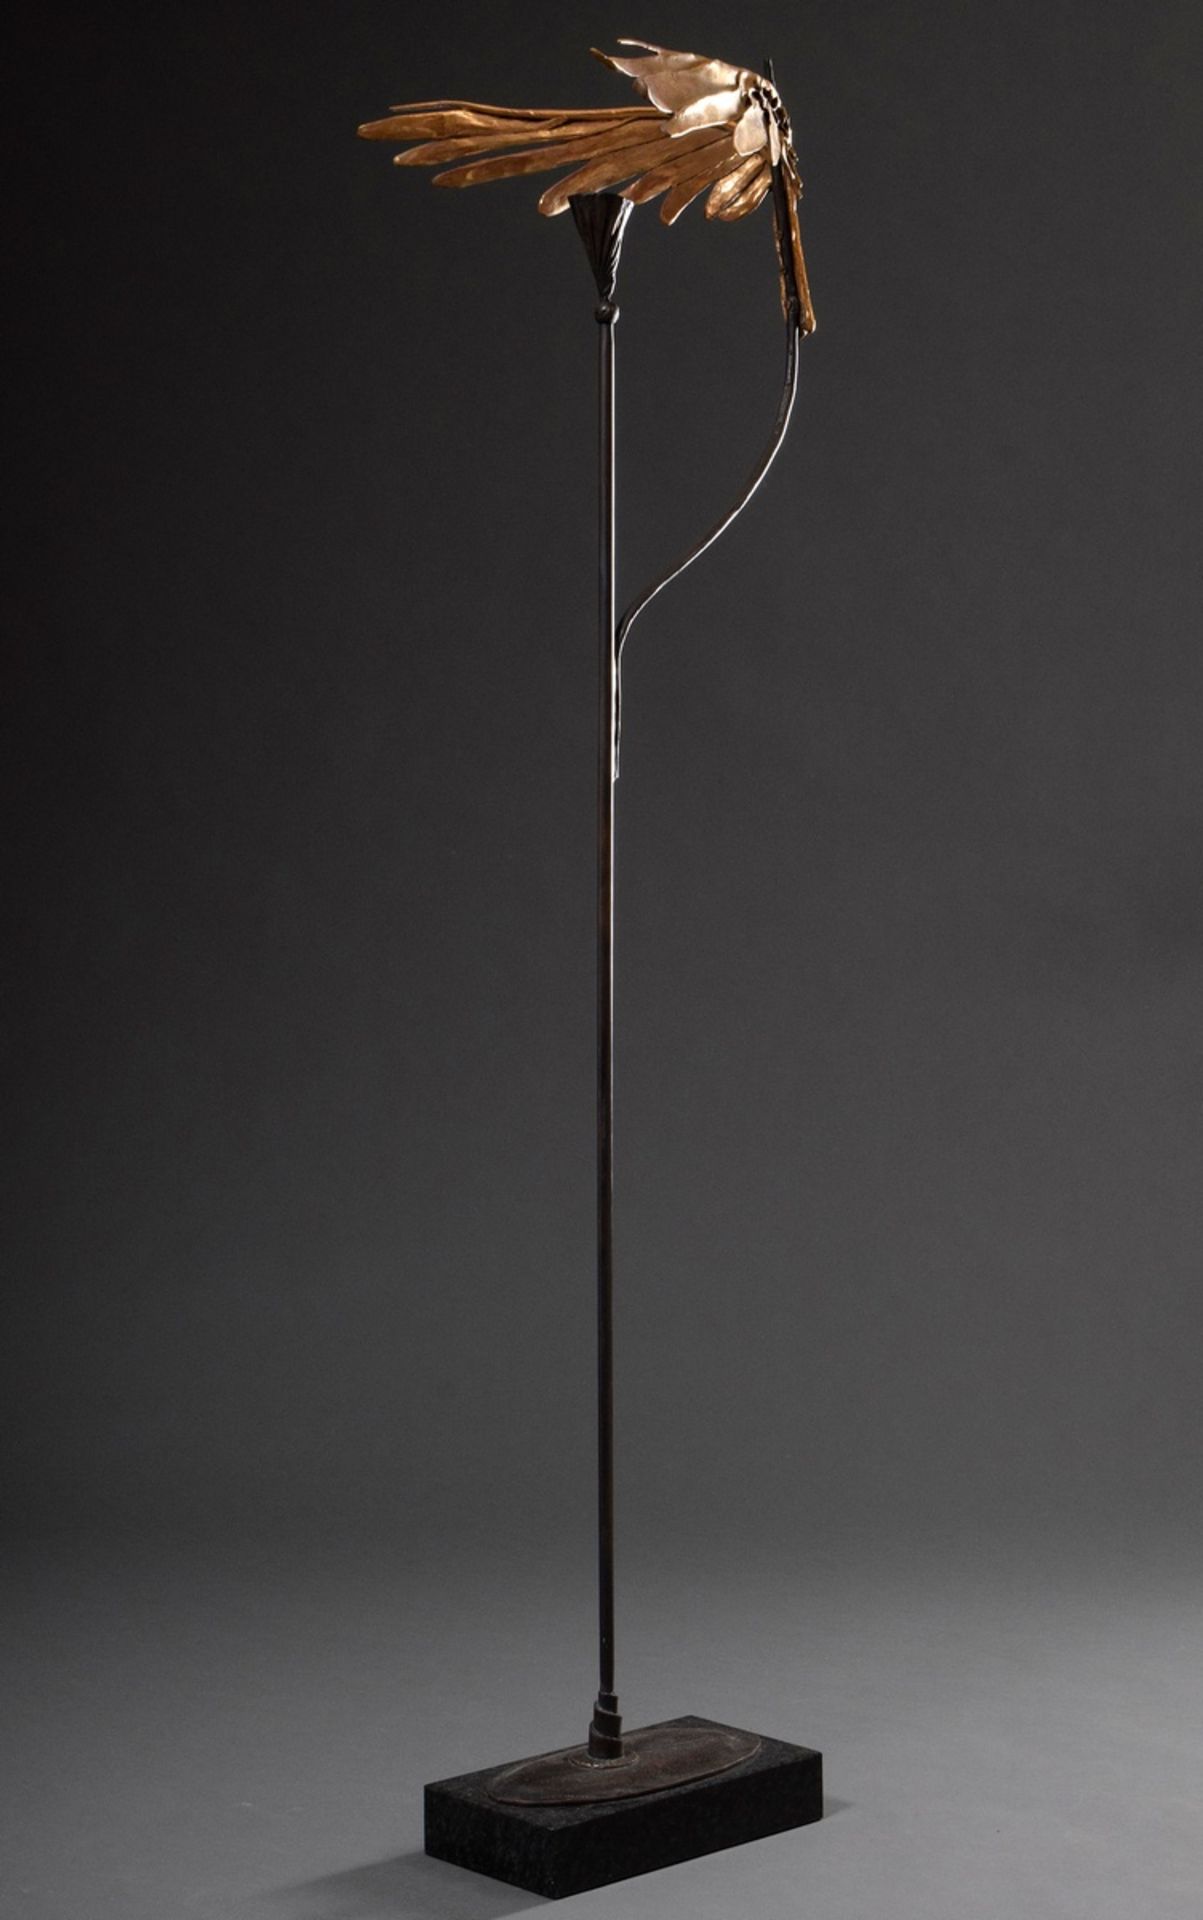 Wunderlich, Paul (1927-2010) "winged candlestick", bronze on marble base 108/500, sign./num. on sta - Image 2 of 8